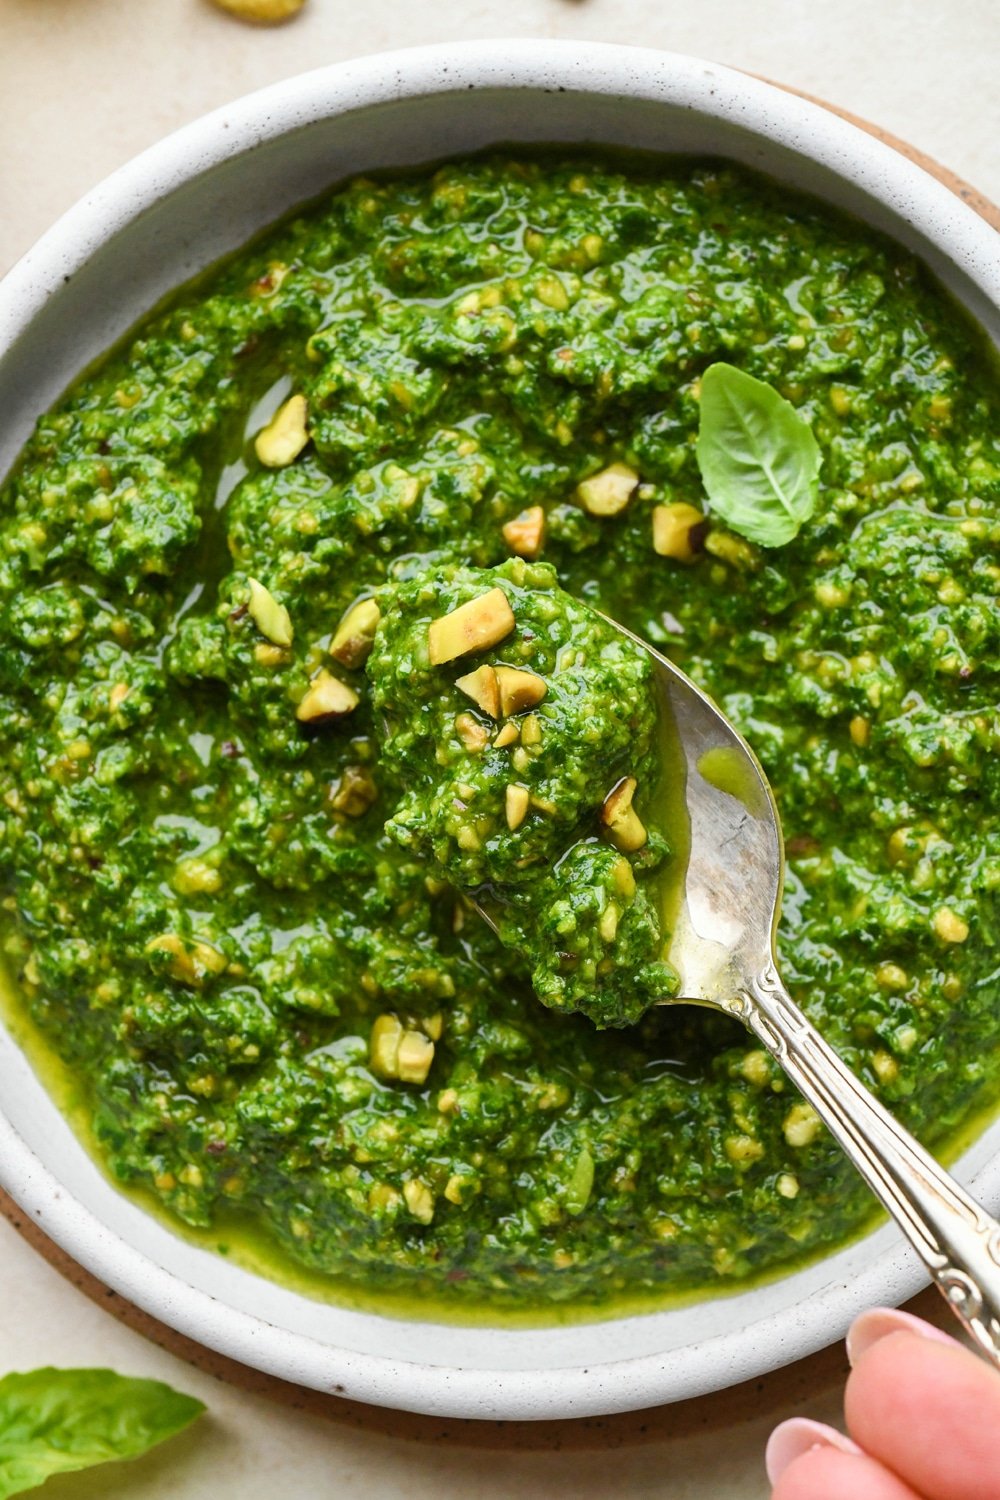 A small bowl of bright green pistachio pesto, topped with a few chopped pistachios and a small basil leaf, with a teaspoon lifting our a small portion of pesto.